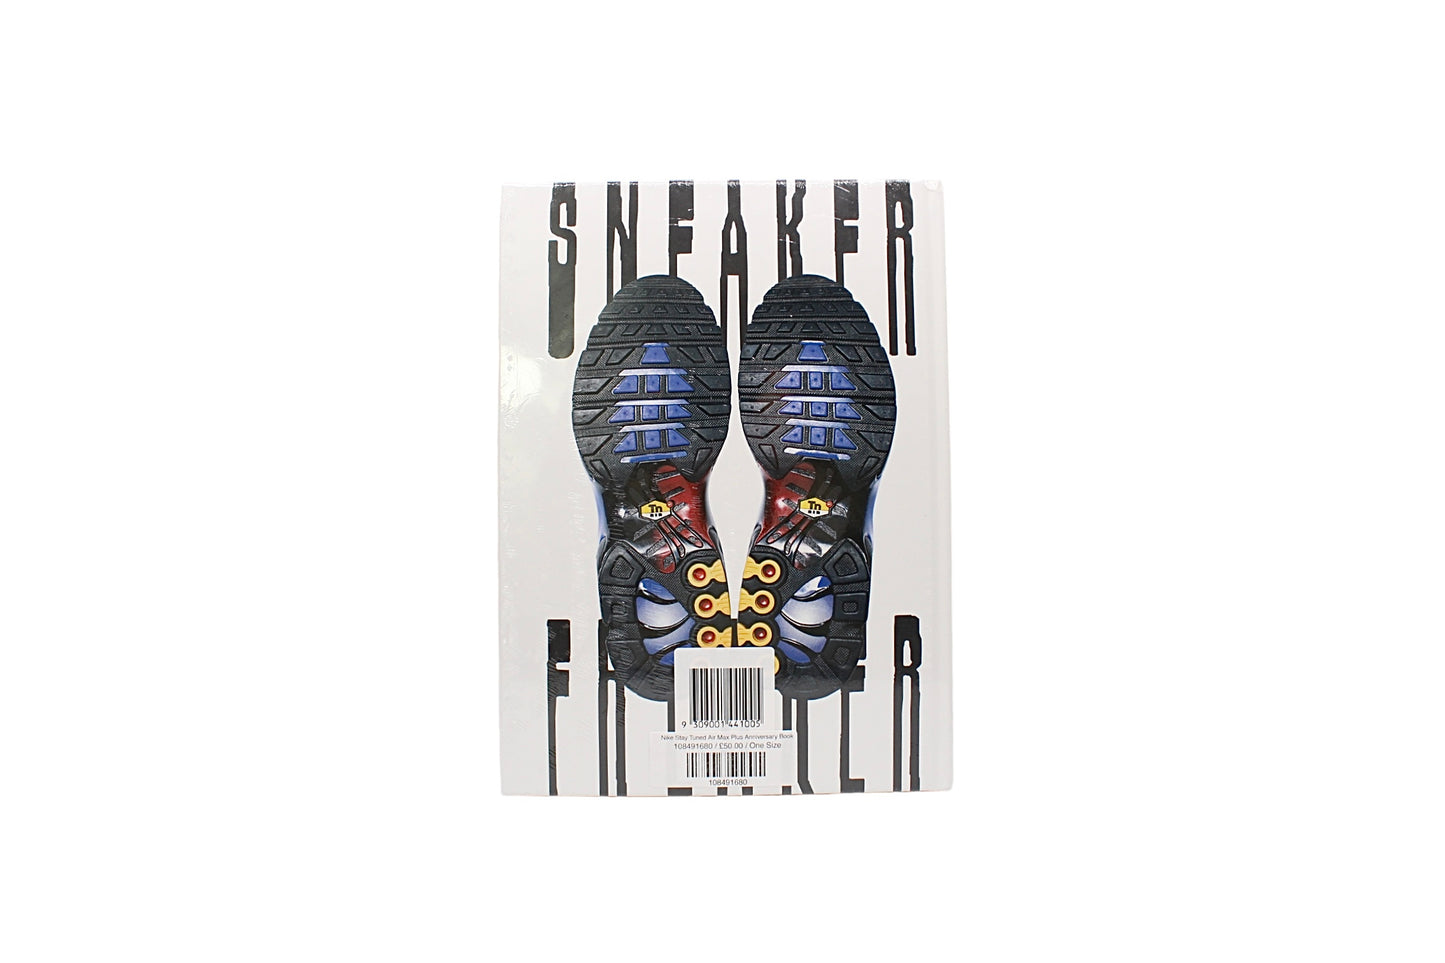 Nike Stay Tuned Air Max Plus Anniversary Book